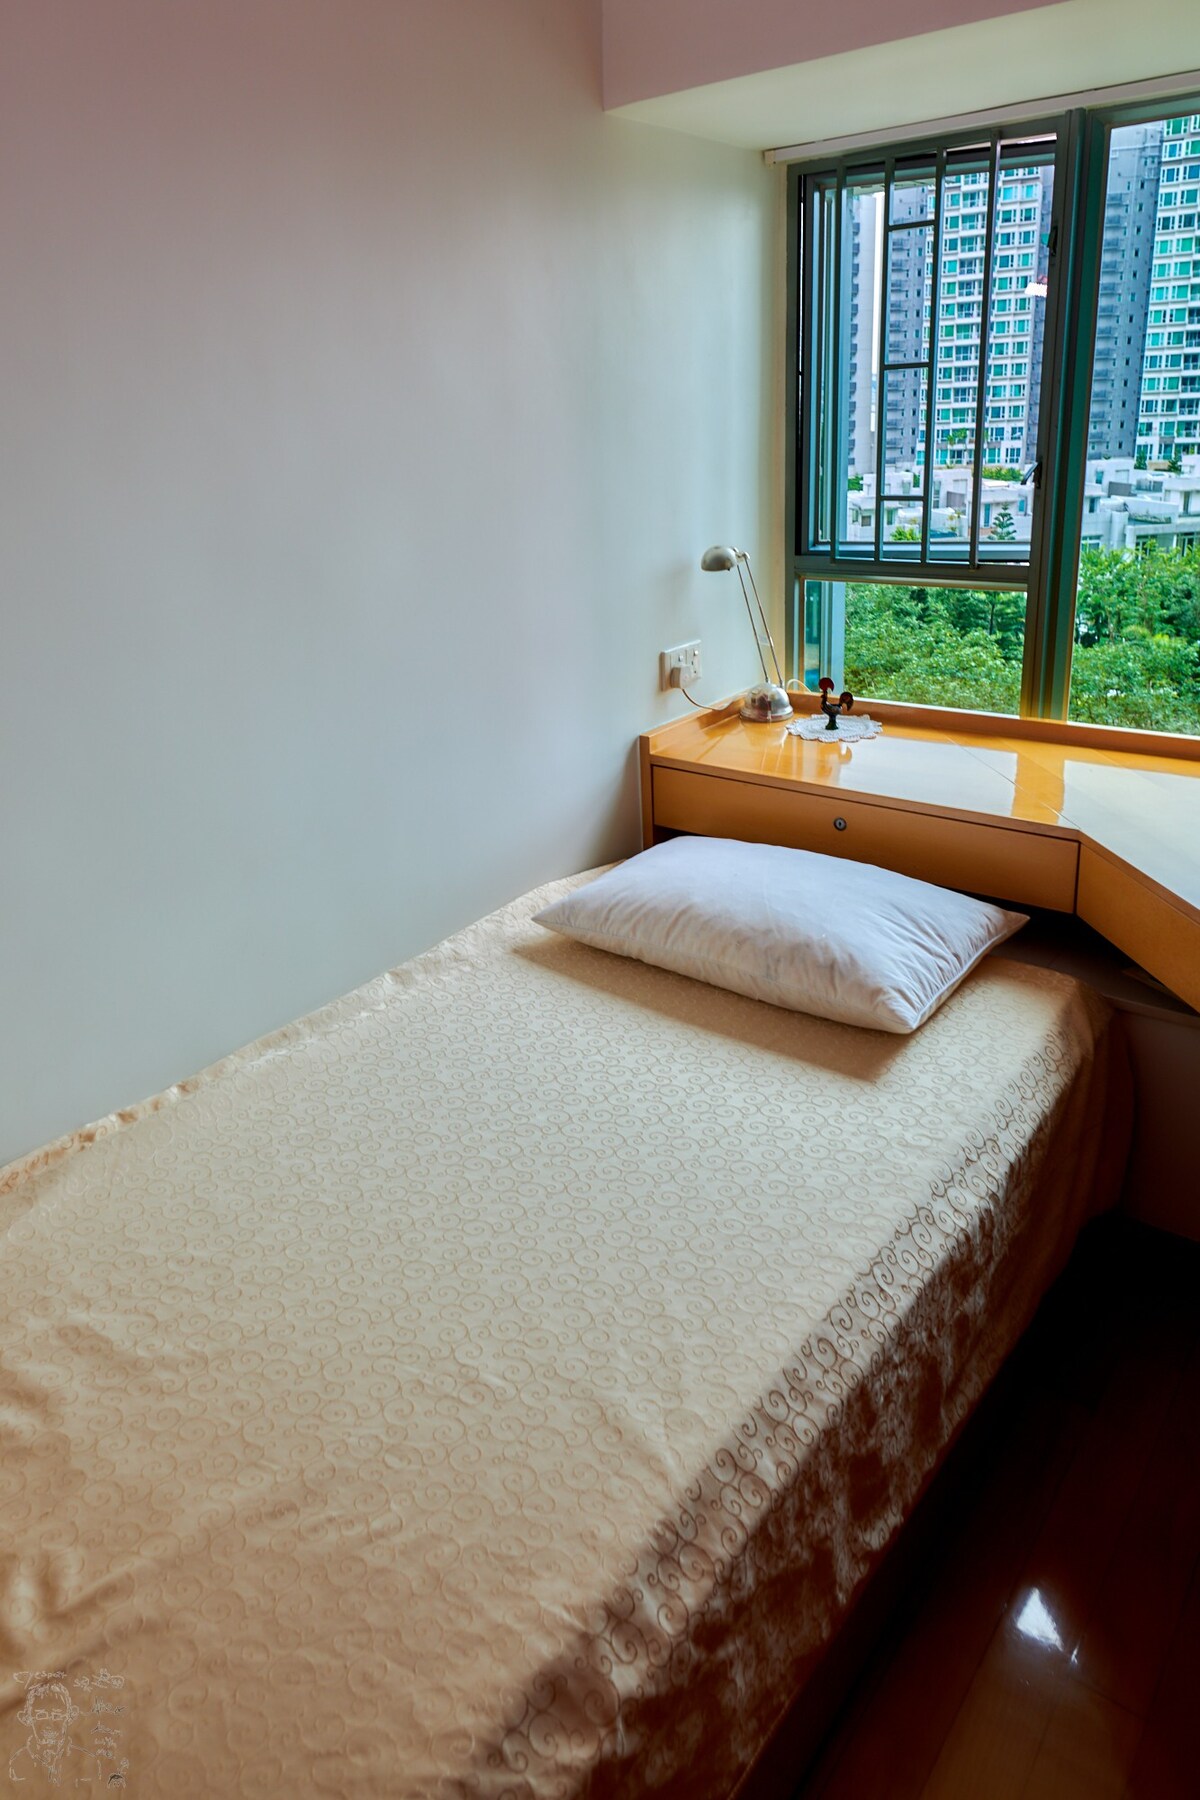 Comfortable room with refreshing view